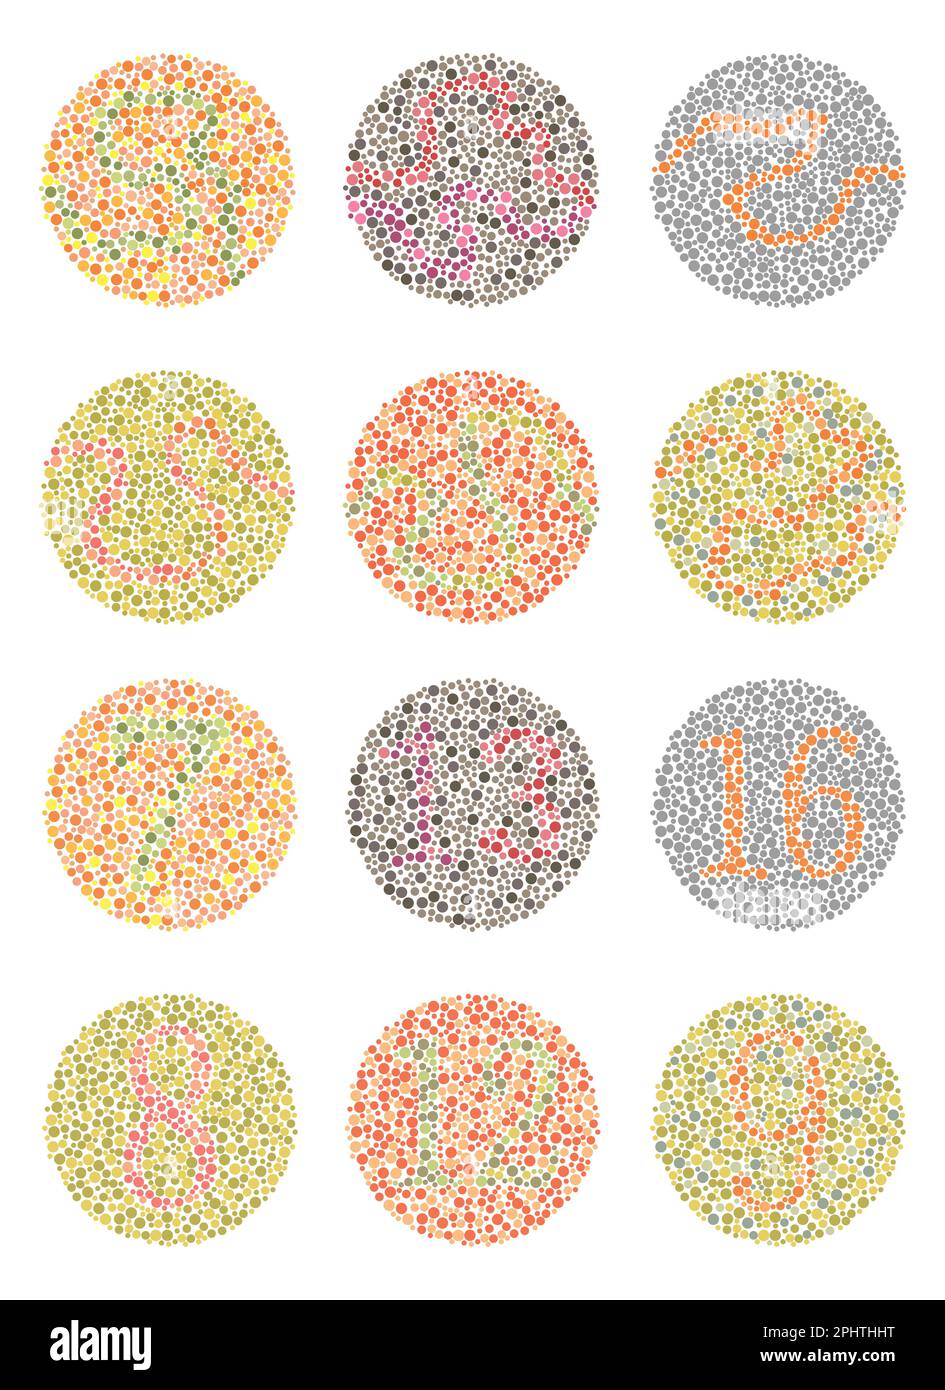 circle plate with numbers form blind color Ishihara test Stock Vector